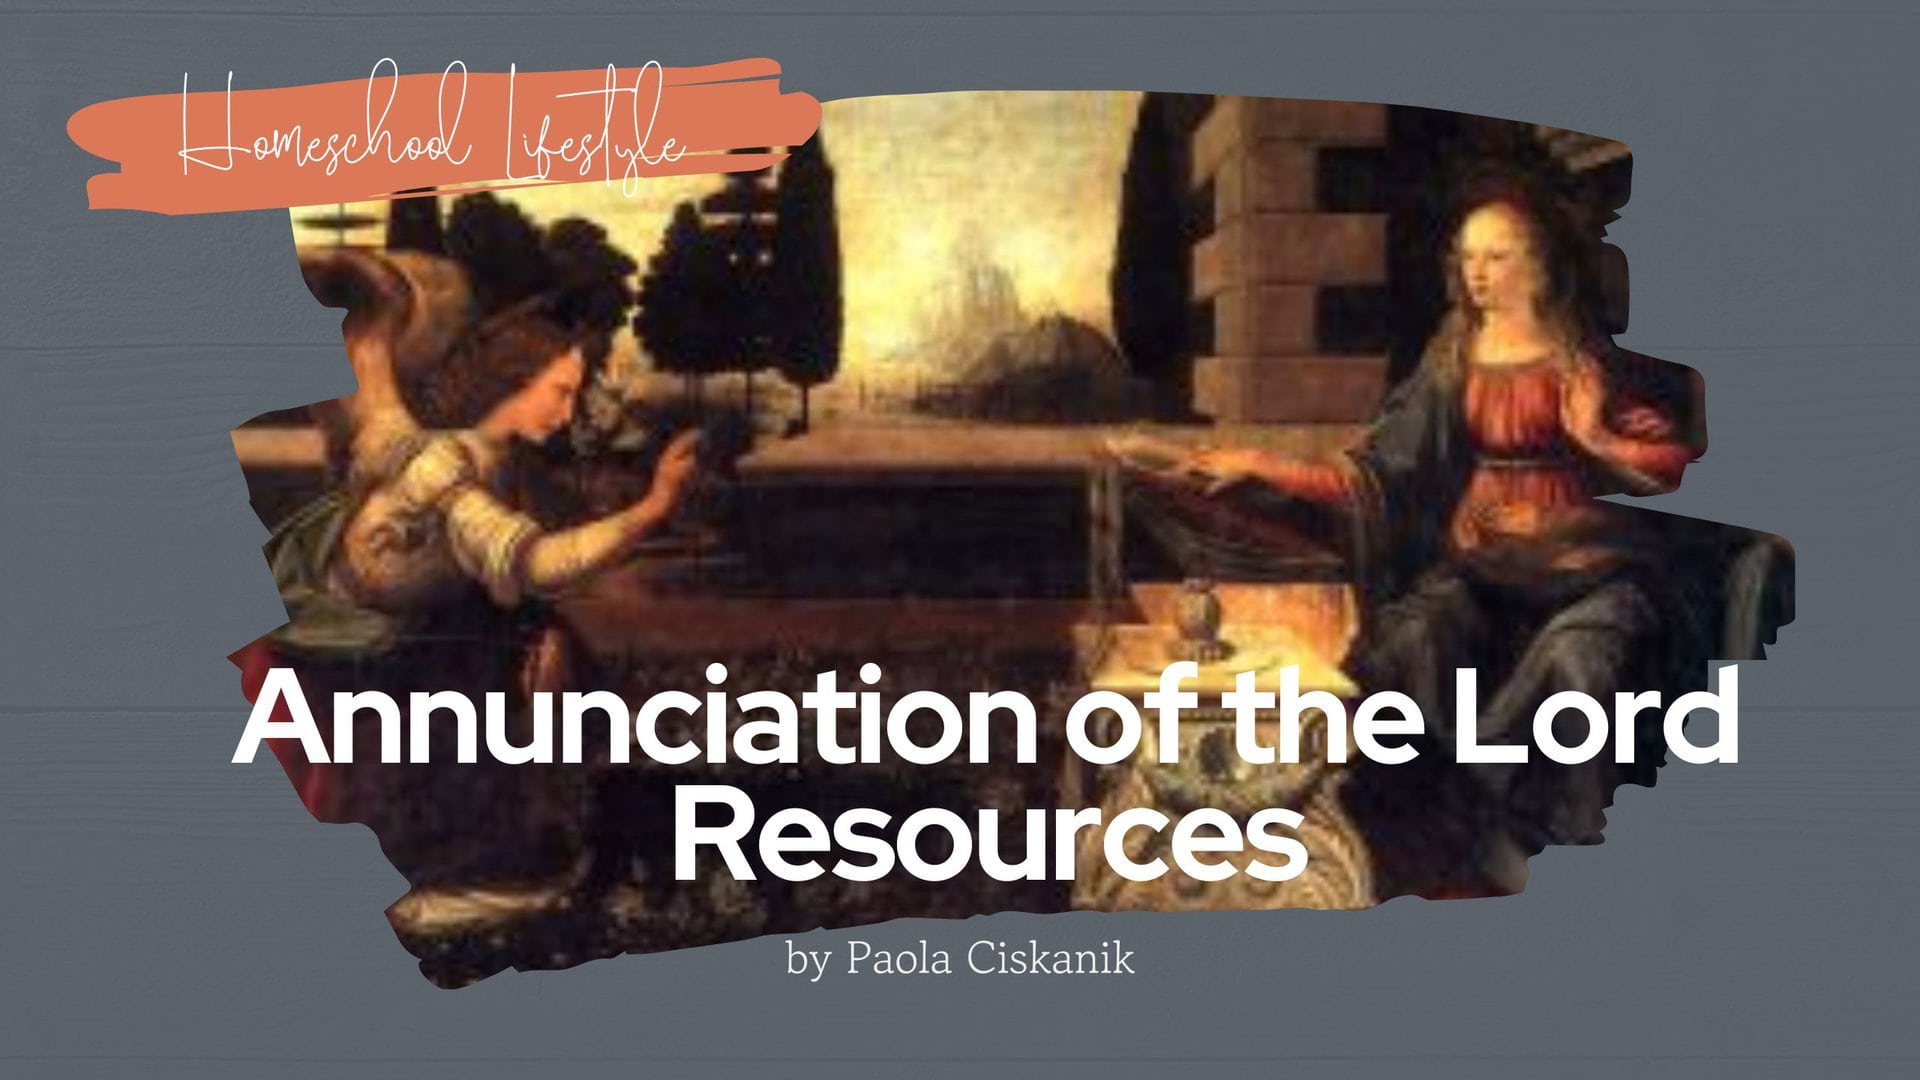 Feast Day Resources: Annunciation